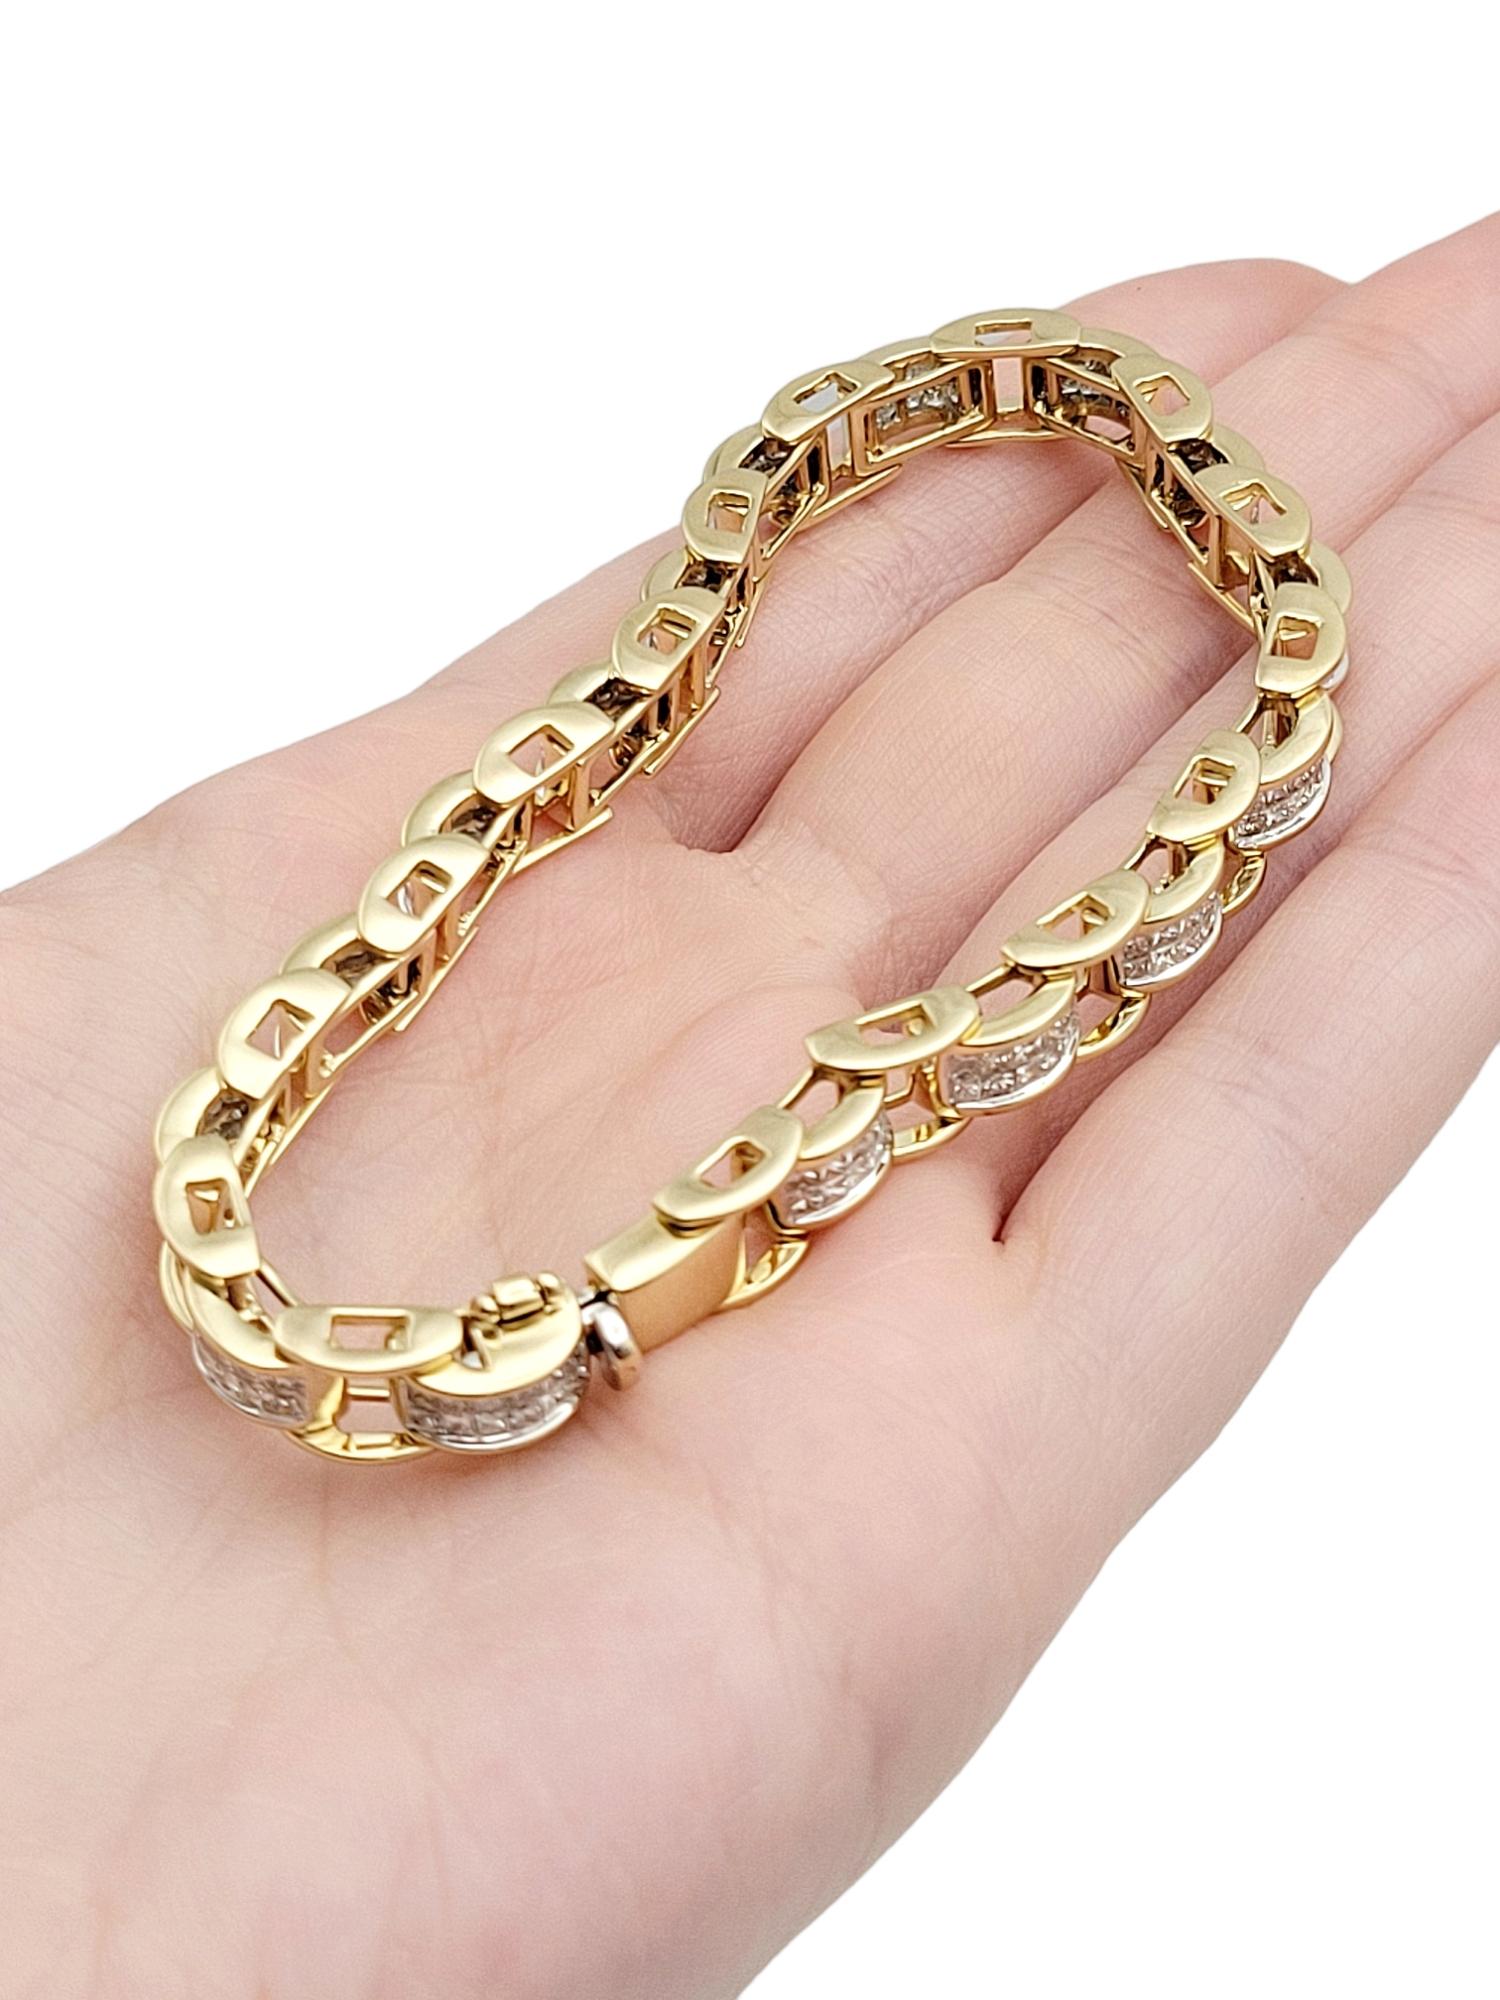 5.00 Carats Total Princess Cut Diamond Bike Chain Style Bracelet in Yellow Gold For Sale 2